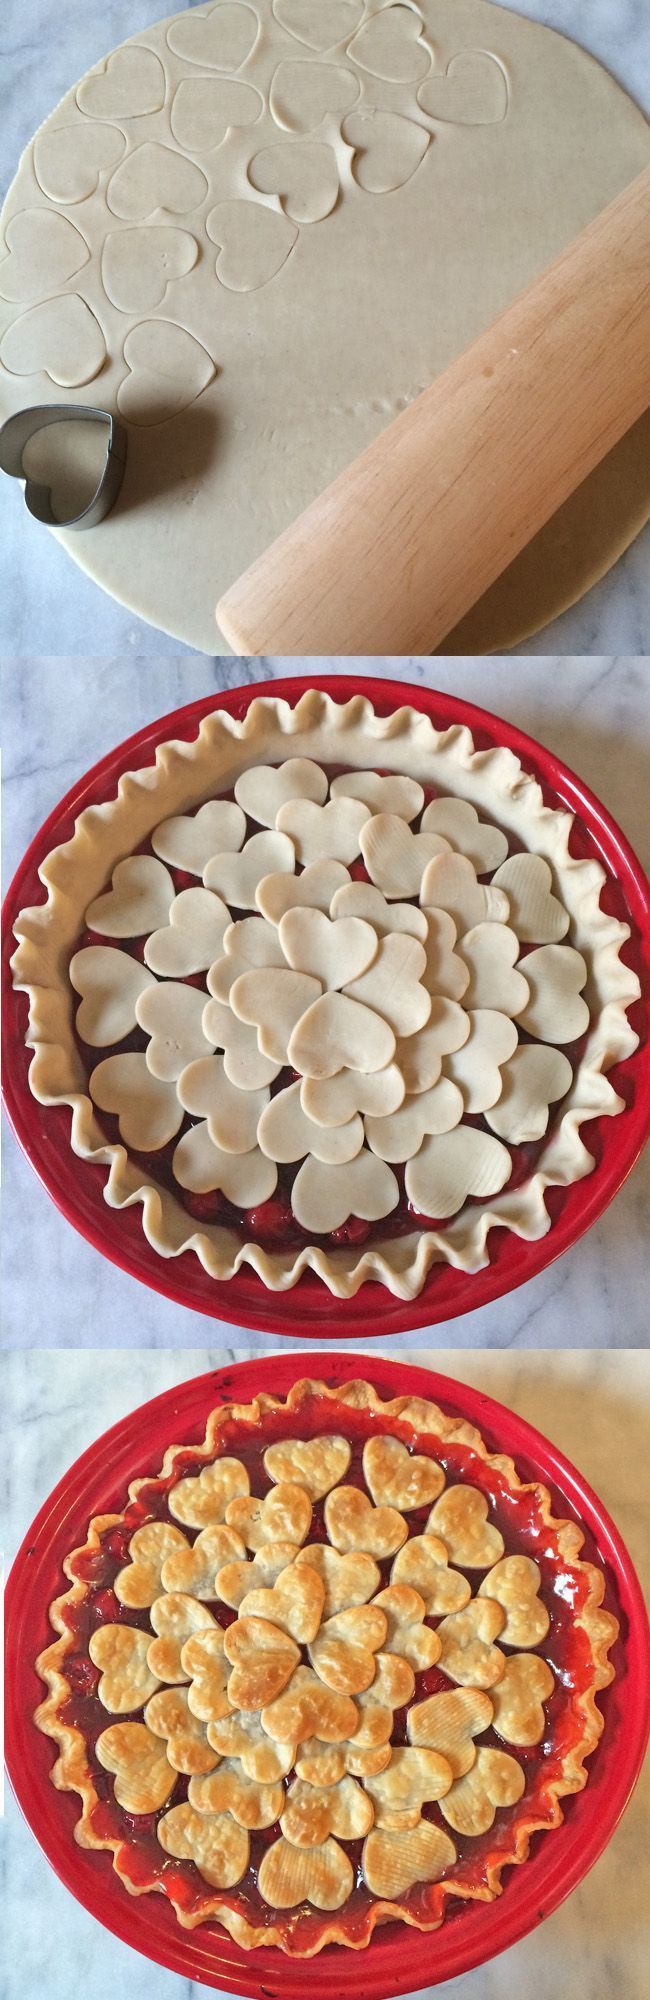 Heart pie! Click through for 35 amazing, over-the-top Valentines Day ideas, i